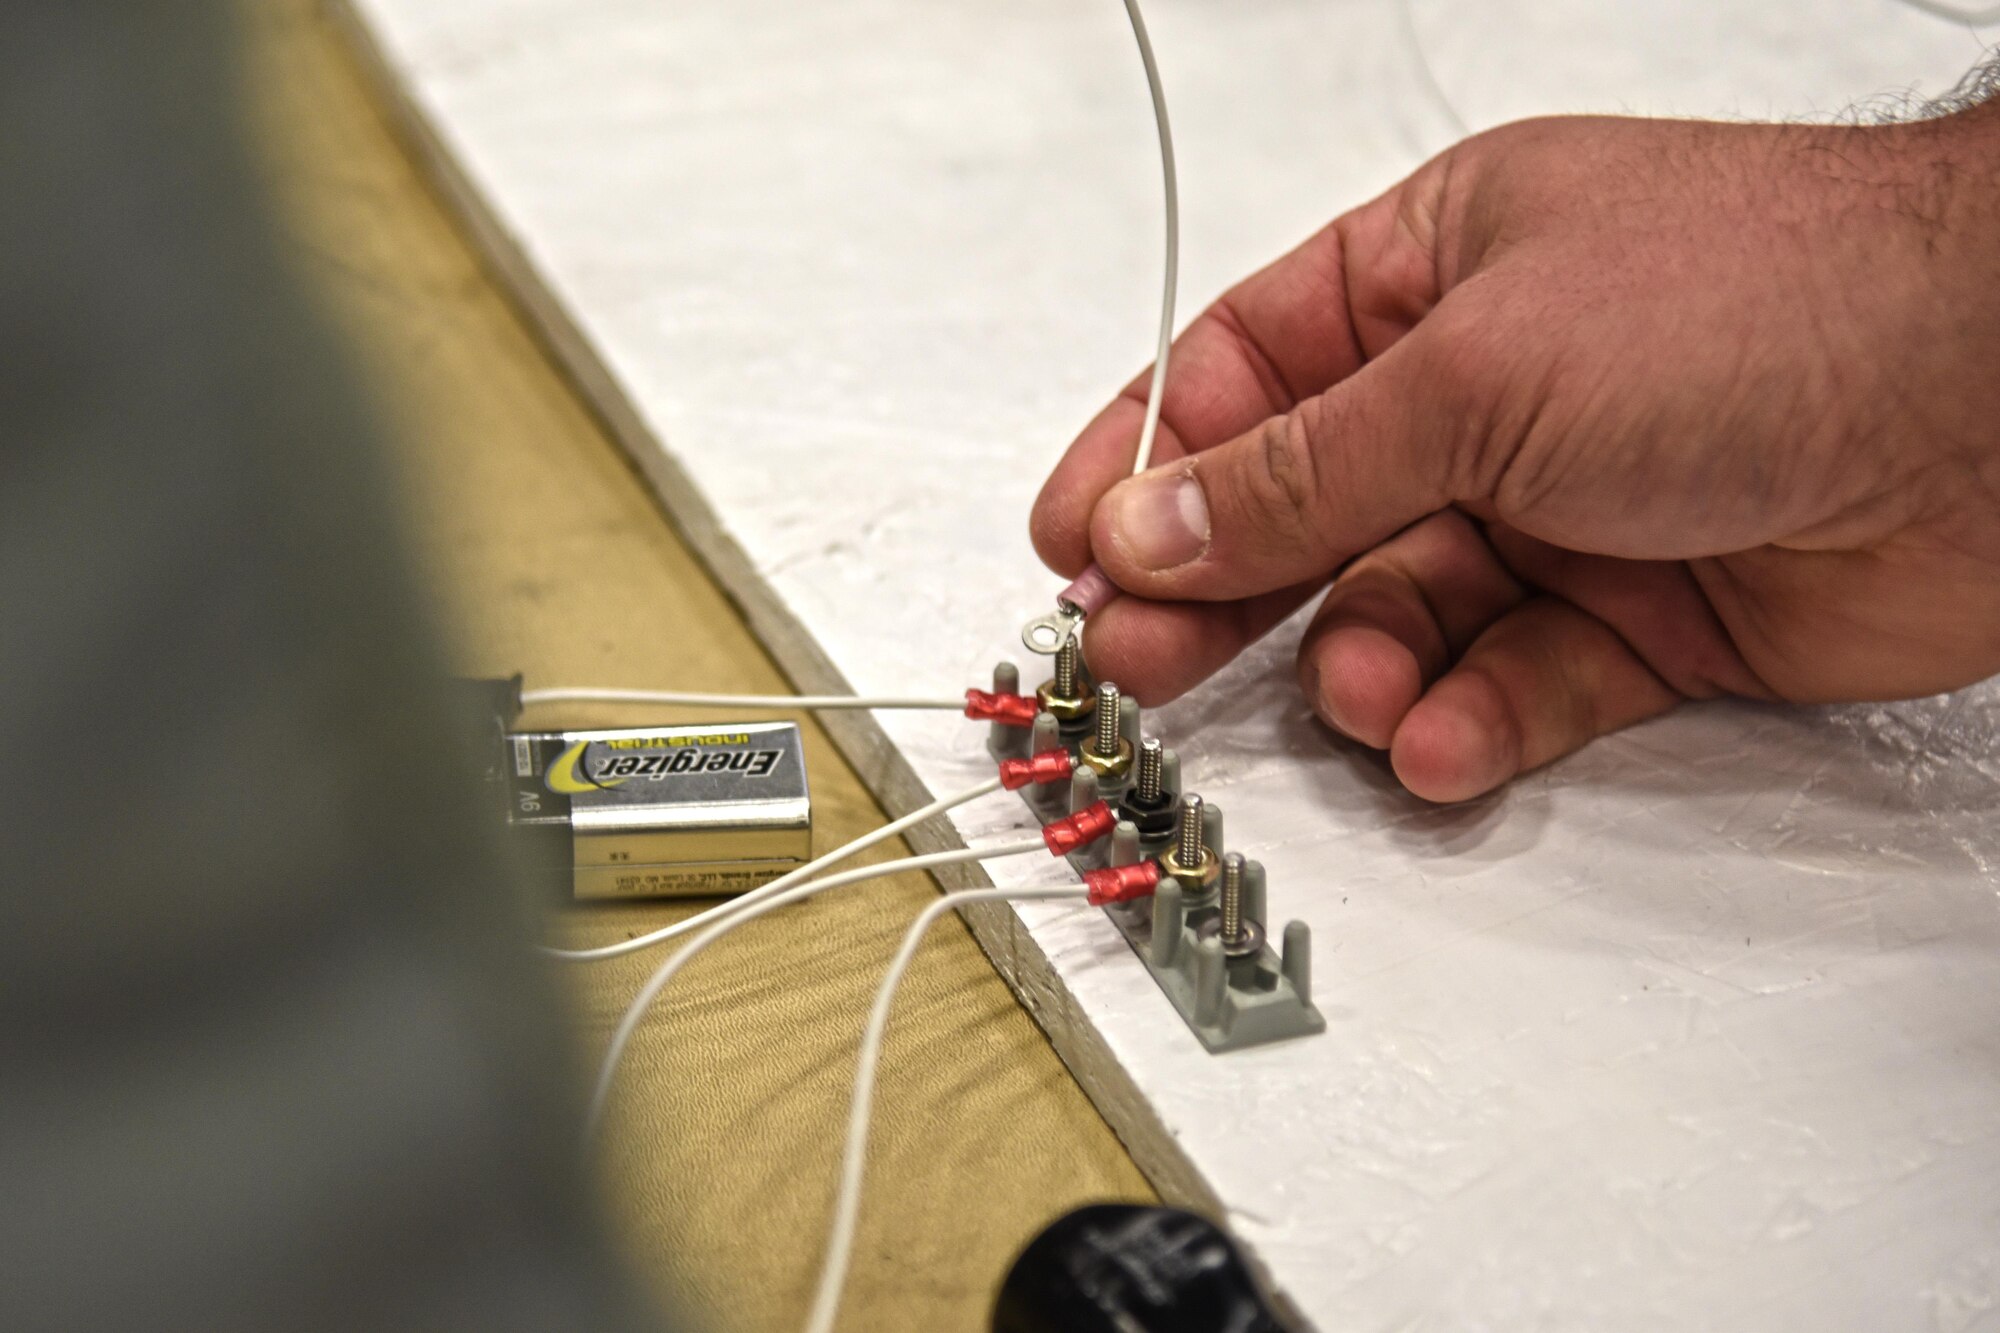 A team works on completing the circuit board challenge during the 92nd and 141st Maintenance Group Fall Olympics Nov. 15, 2015, at Fairchild Air Force Base. The circuit board challenge involved wires, batteries and numerous tools with the objective being to complete a full circuit using a switch to turn on a light bulb. The circuit board included a switch, circuit breaker, switch board, various connections and a light bulb. (U.S. Air Force photo/Senior Airman Mackenzie Richardson)